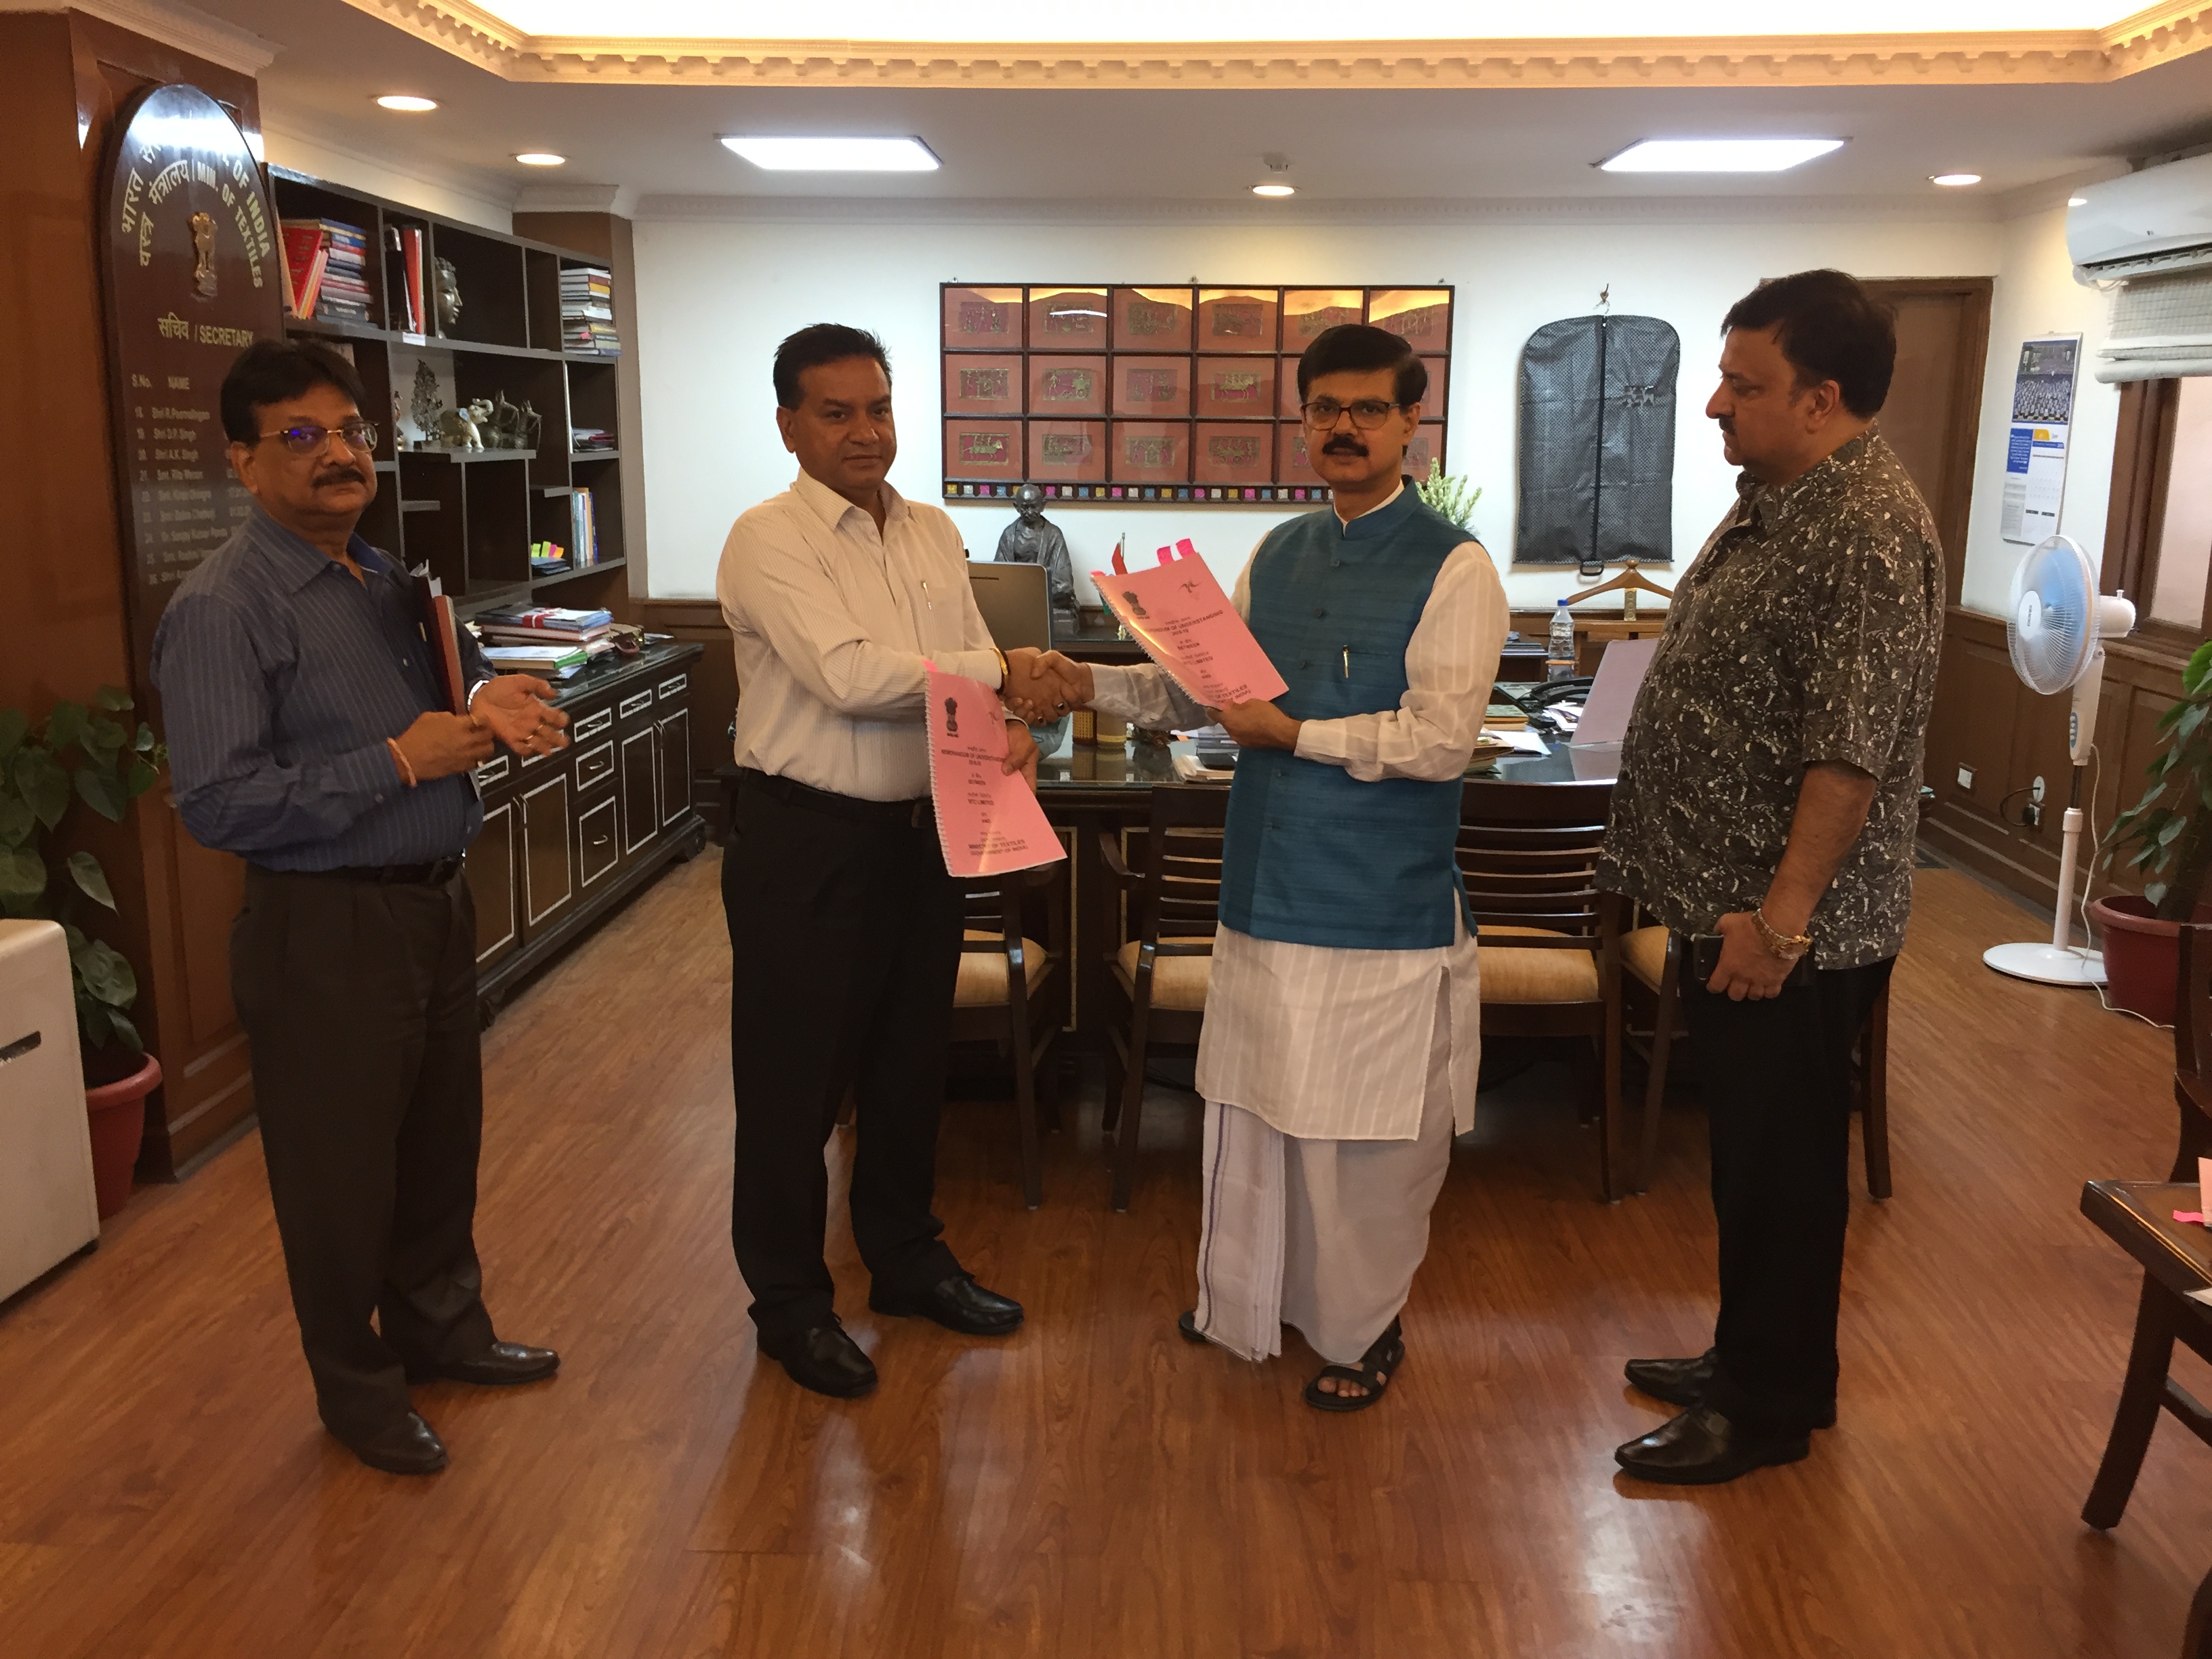 National Textile Corporation  signed Memorandum of Understanding 2018-19 with Ministry of Textiles.  The MoU was signed by Shri Anant Kumar Singh, IAS, Secretary (Textiles), Government of India and Shri Sanjay Rastogi, IAS, CMD, NTC Ltd. on 25.06.2018 in the presence of senior officials of the Ministry of Textiles and NTC Ltd. in New Delhi.